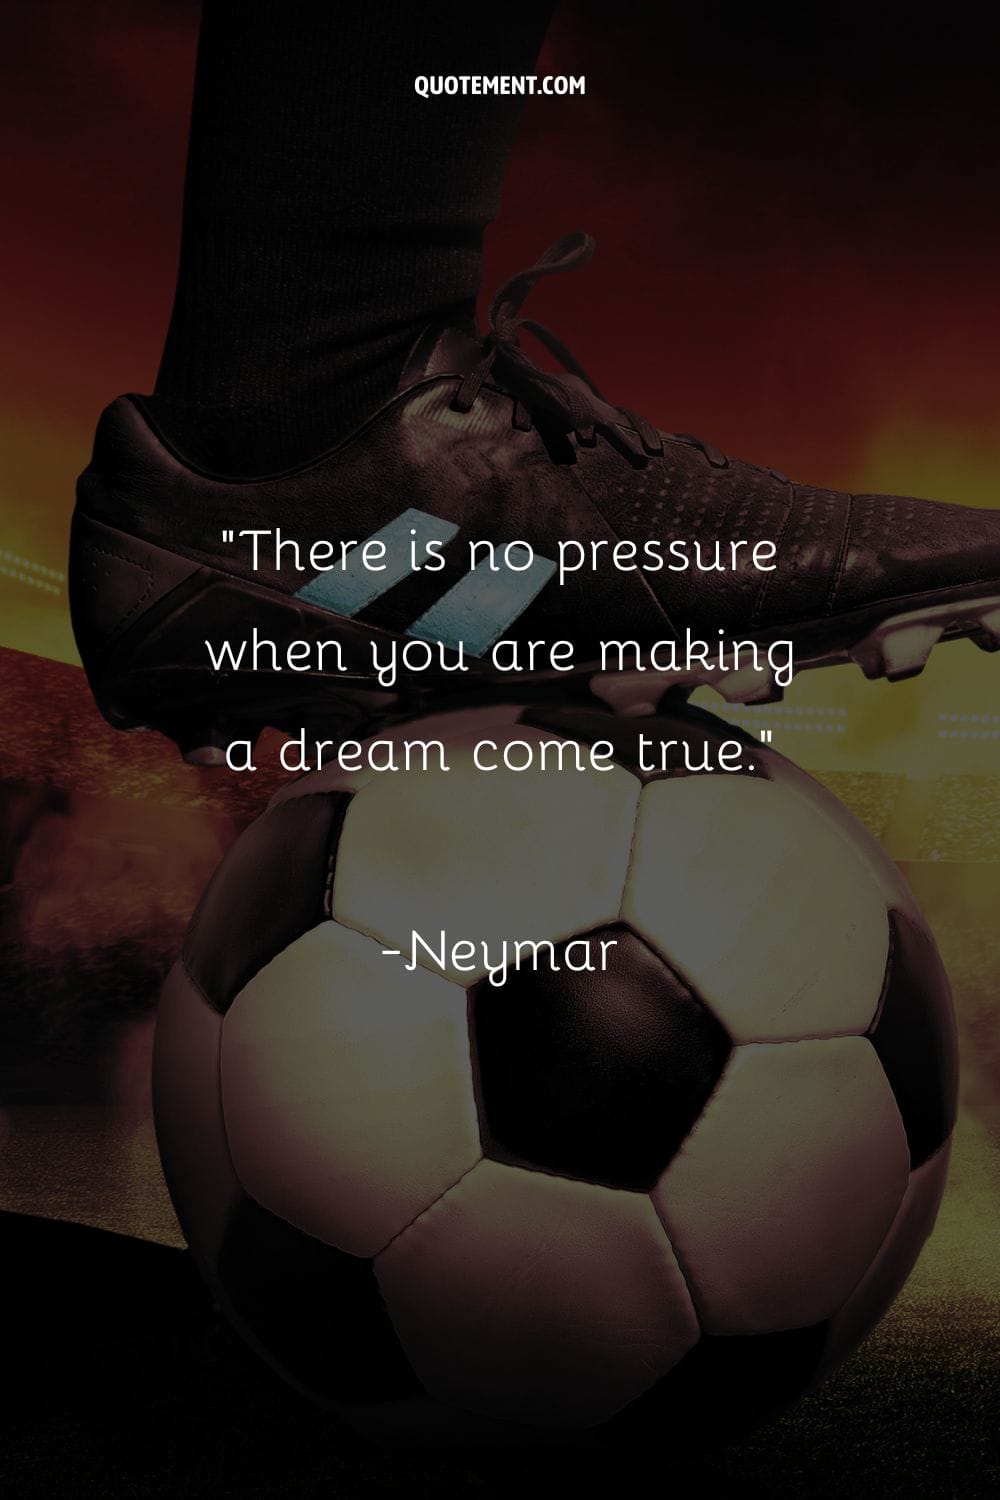 Soccer pro's kick in black cleats representing soccer quote about inspiration